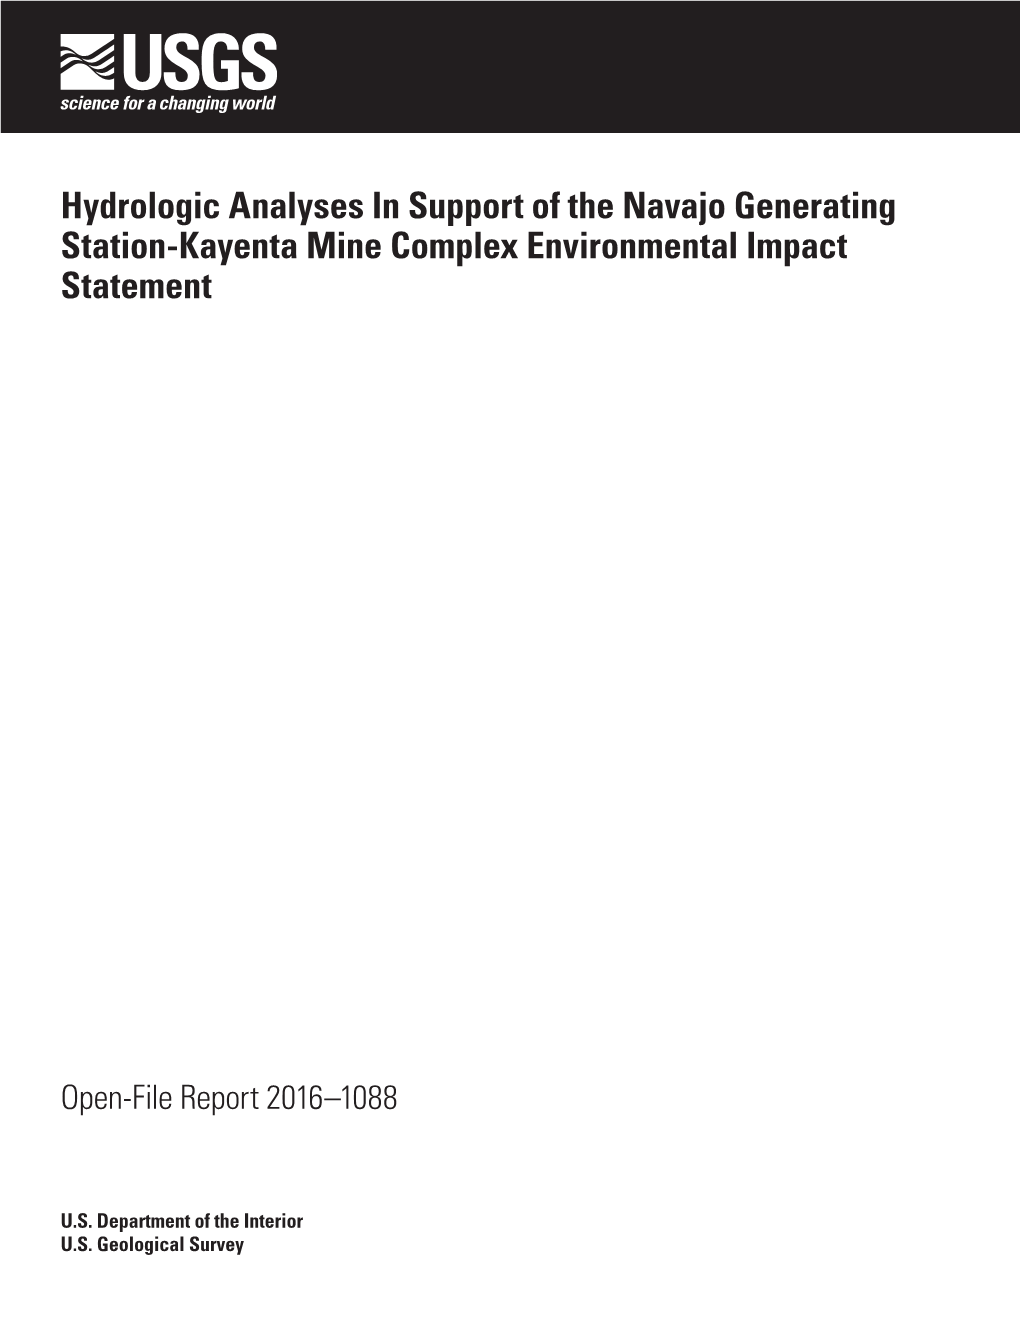 Hydrologic Analyses in Support of the Navajo Generating Station-Kayenta Mine Complex Environmental Impact Statement